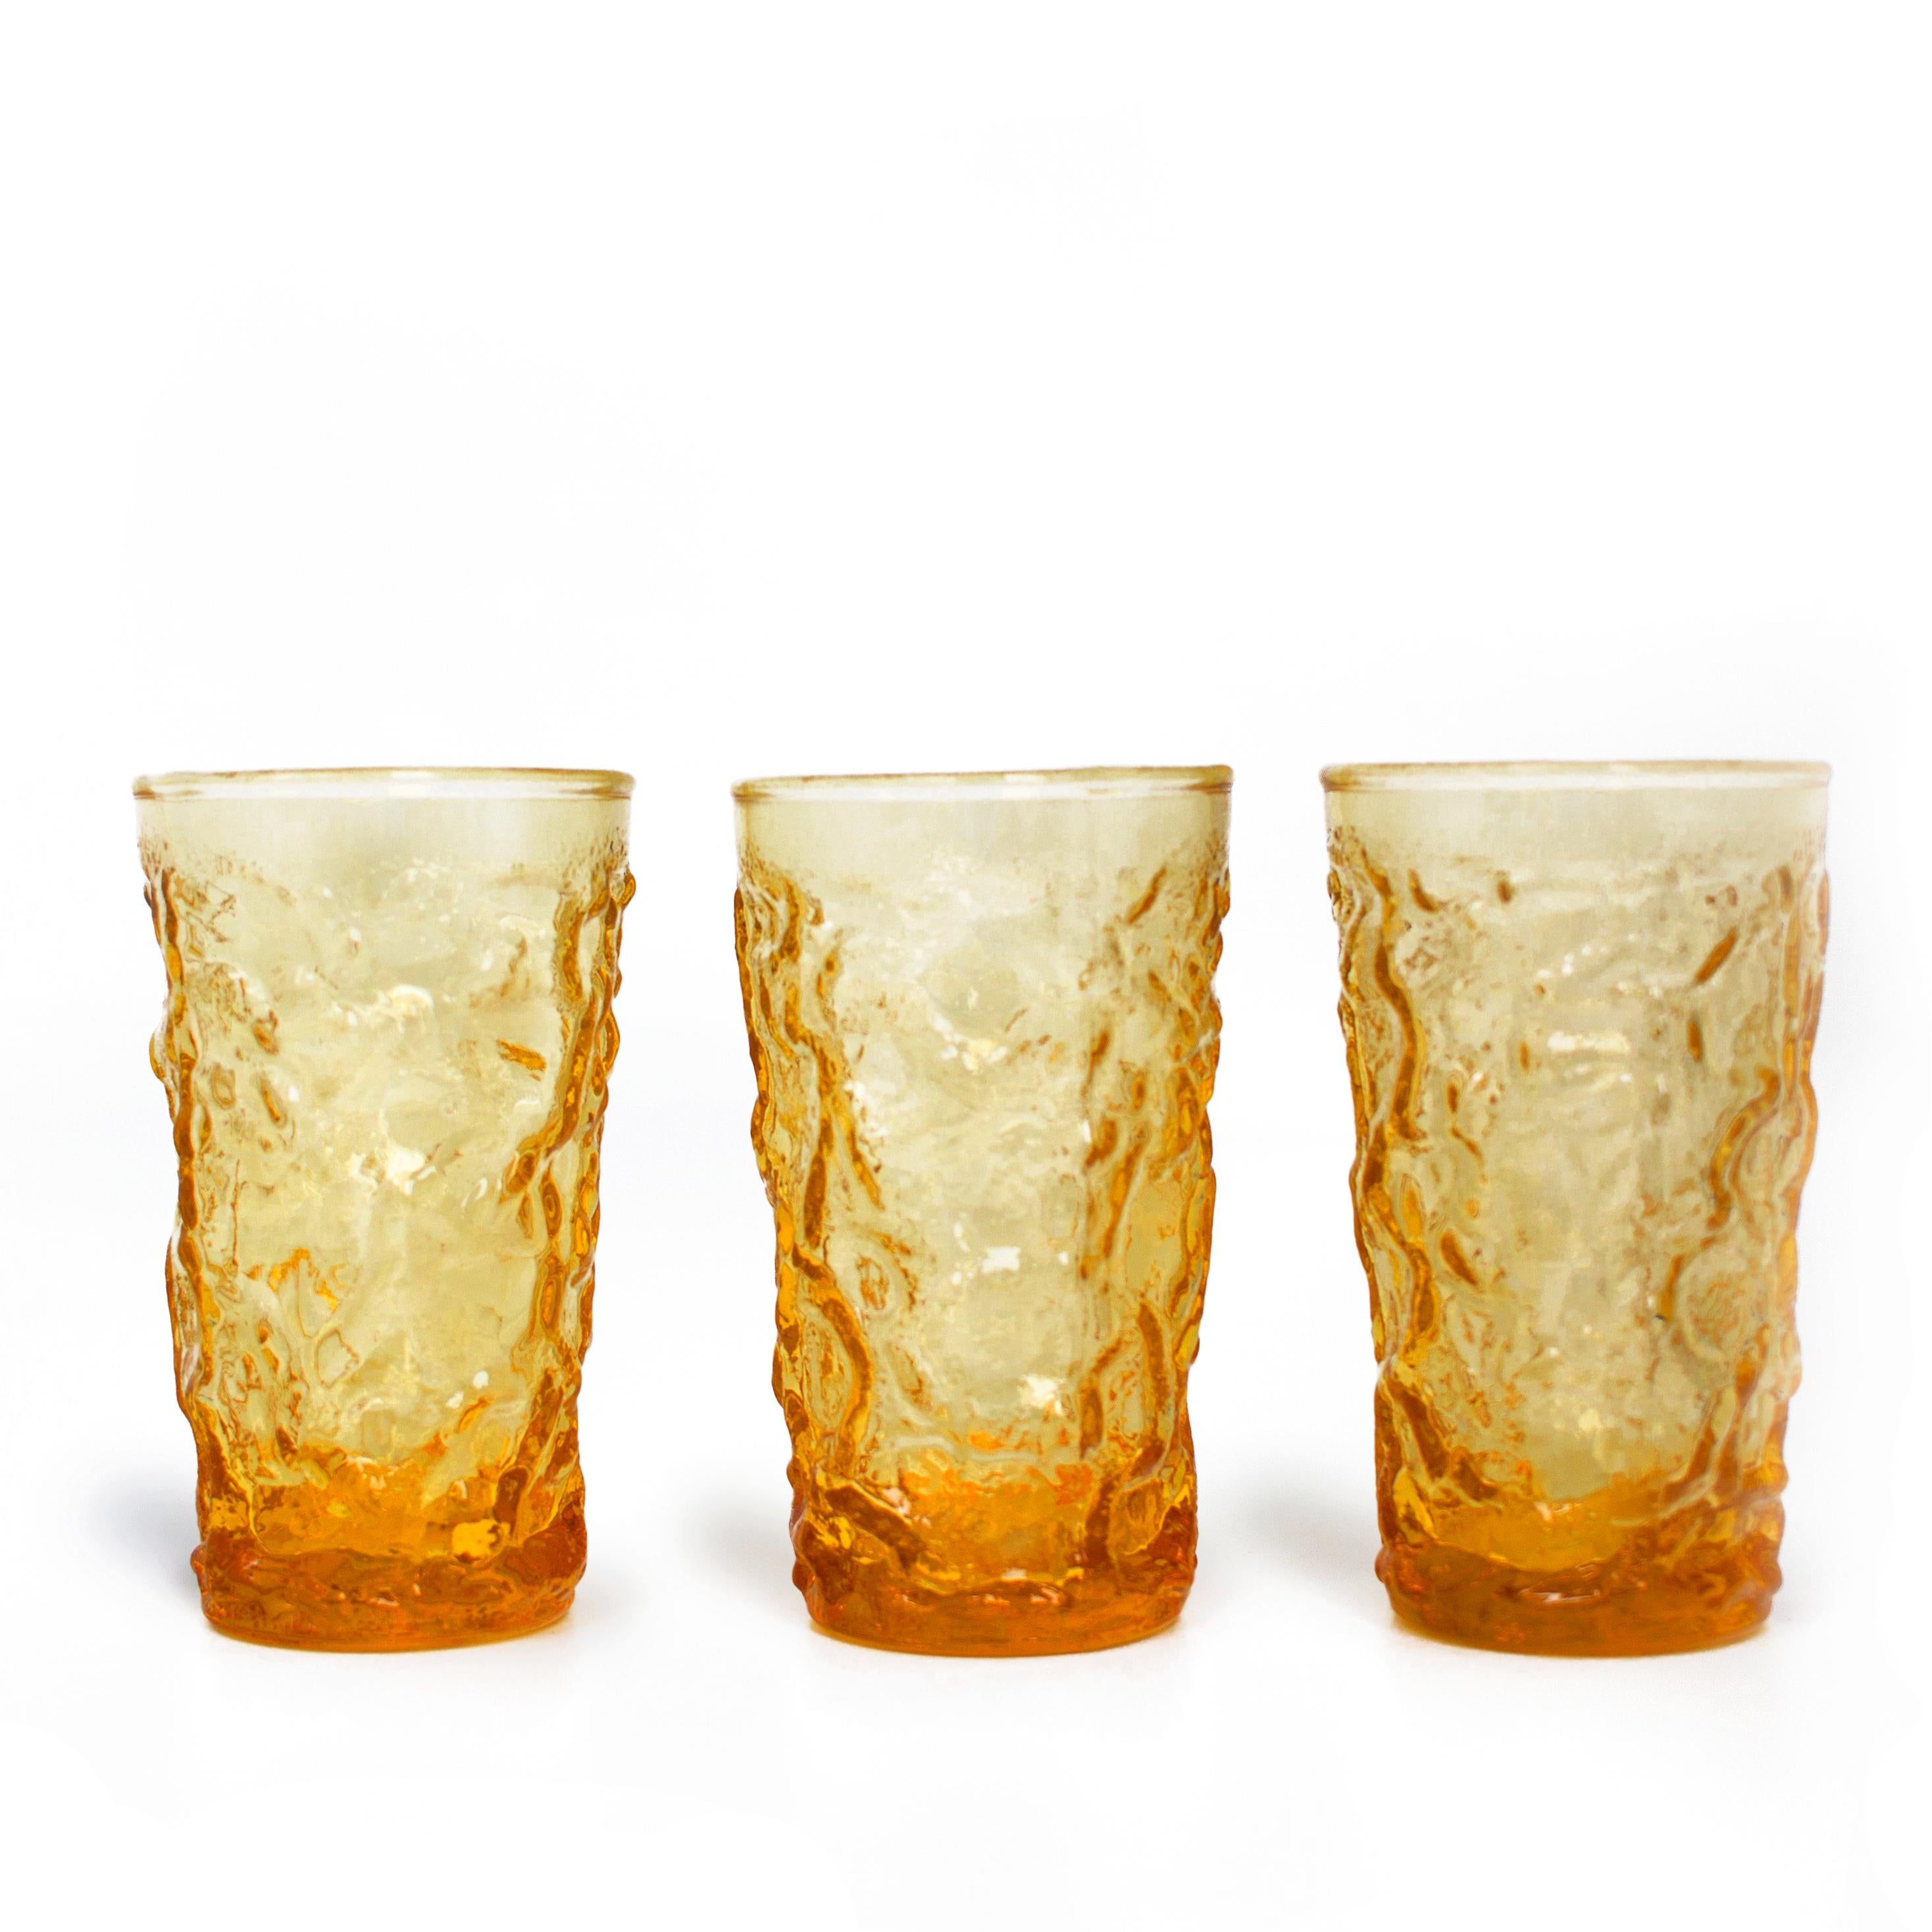 Made in Italy
Measures: 2.25 x 4in
1960s
Glass
Set of 5 mid century tumbler glasses to add color to your kitchen. Textured glass.



